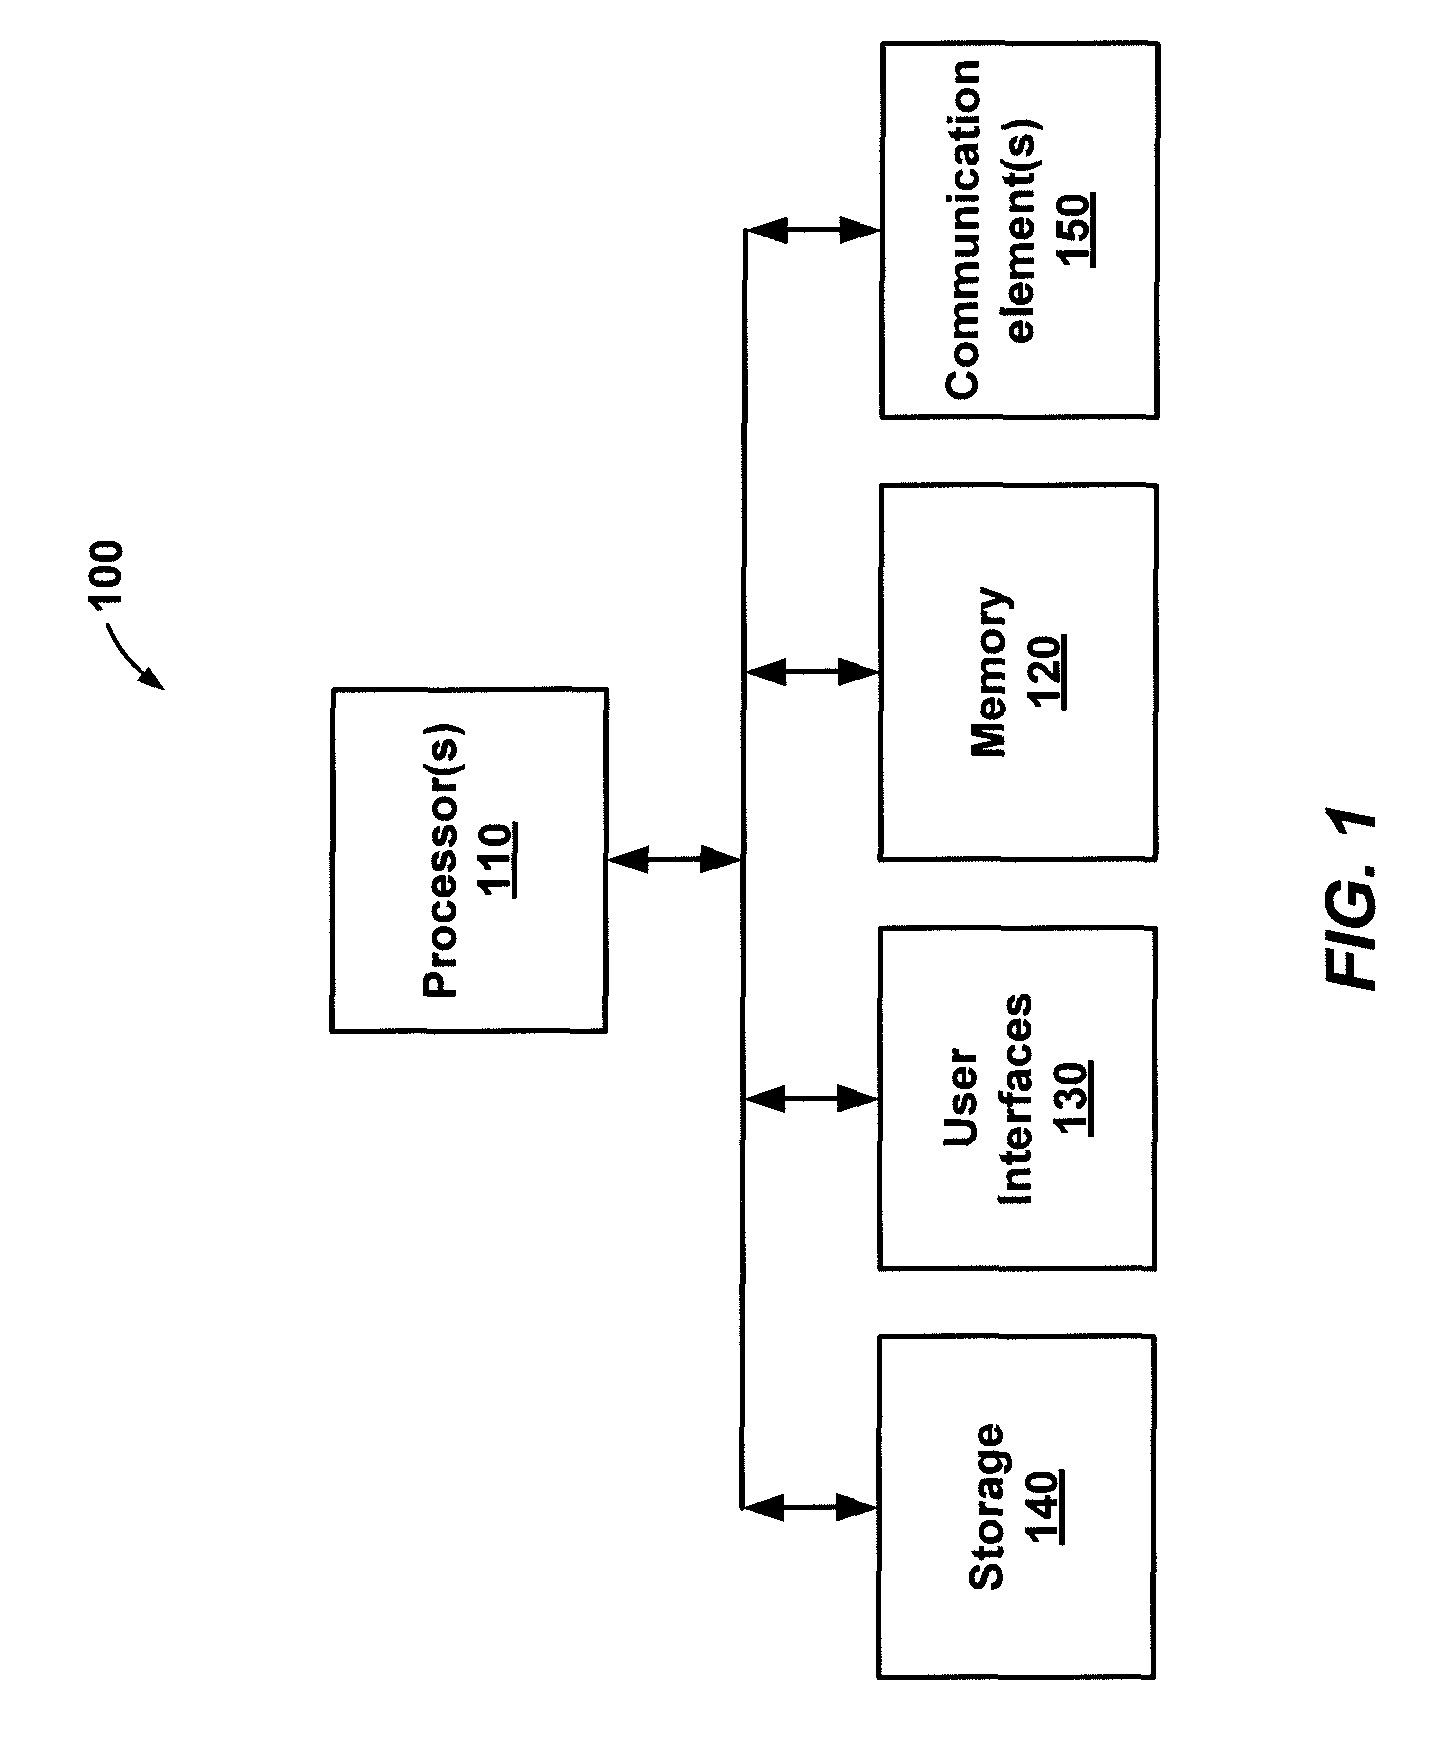 Methods and apparatuses for multi-channel acoustic echo cancelation